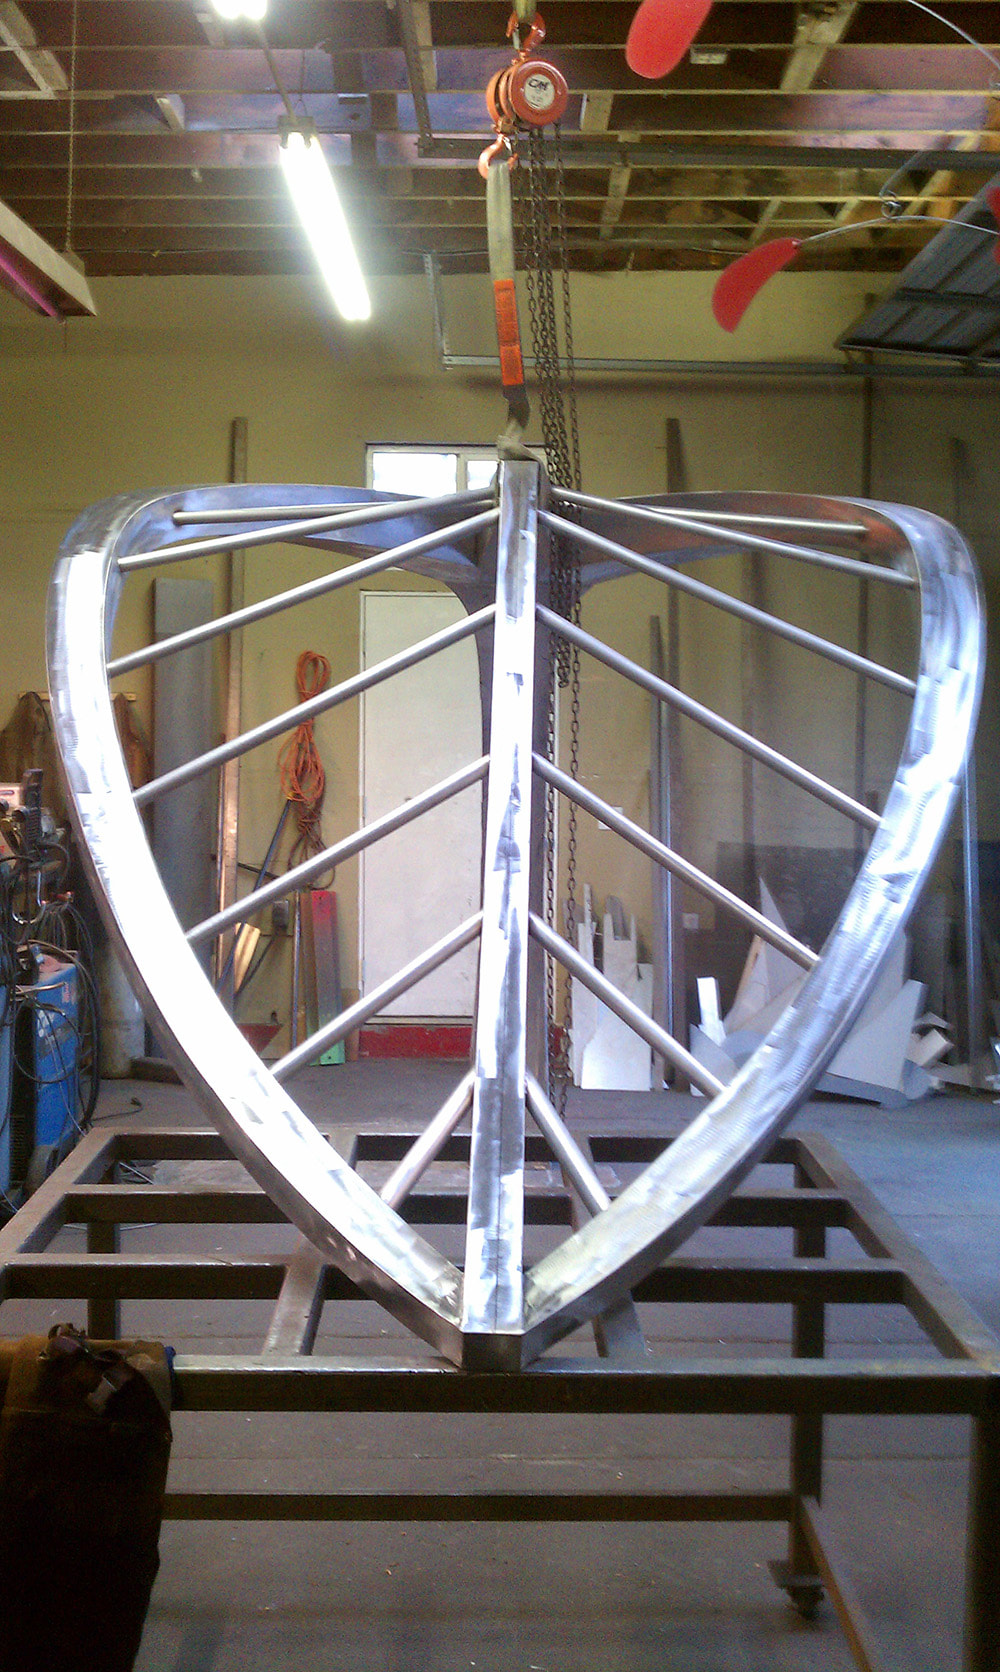 fabrication of stainless steel sculpture hanging from ceiling